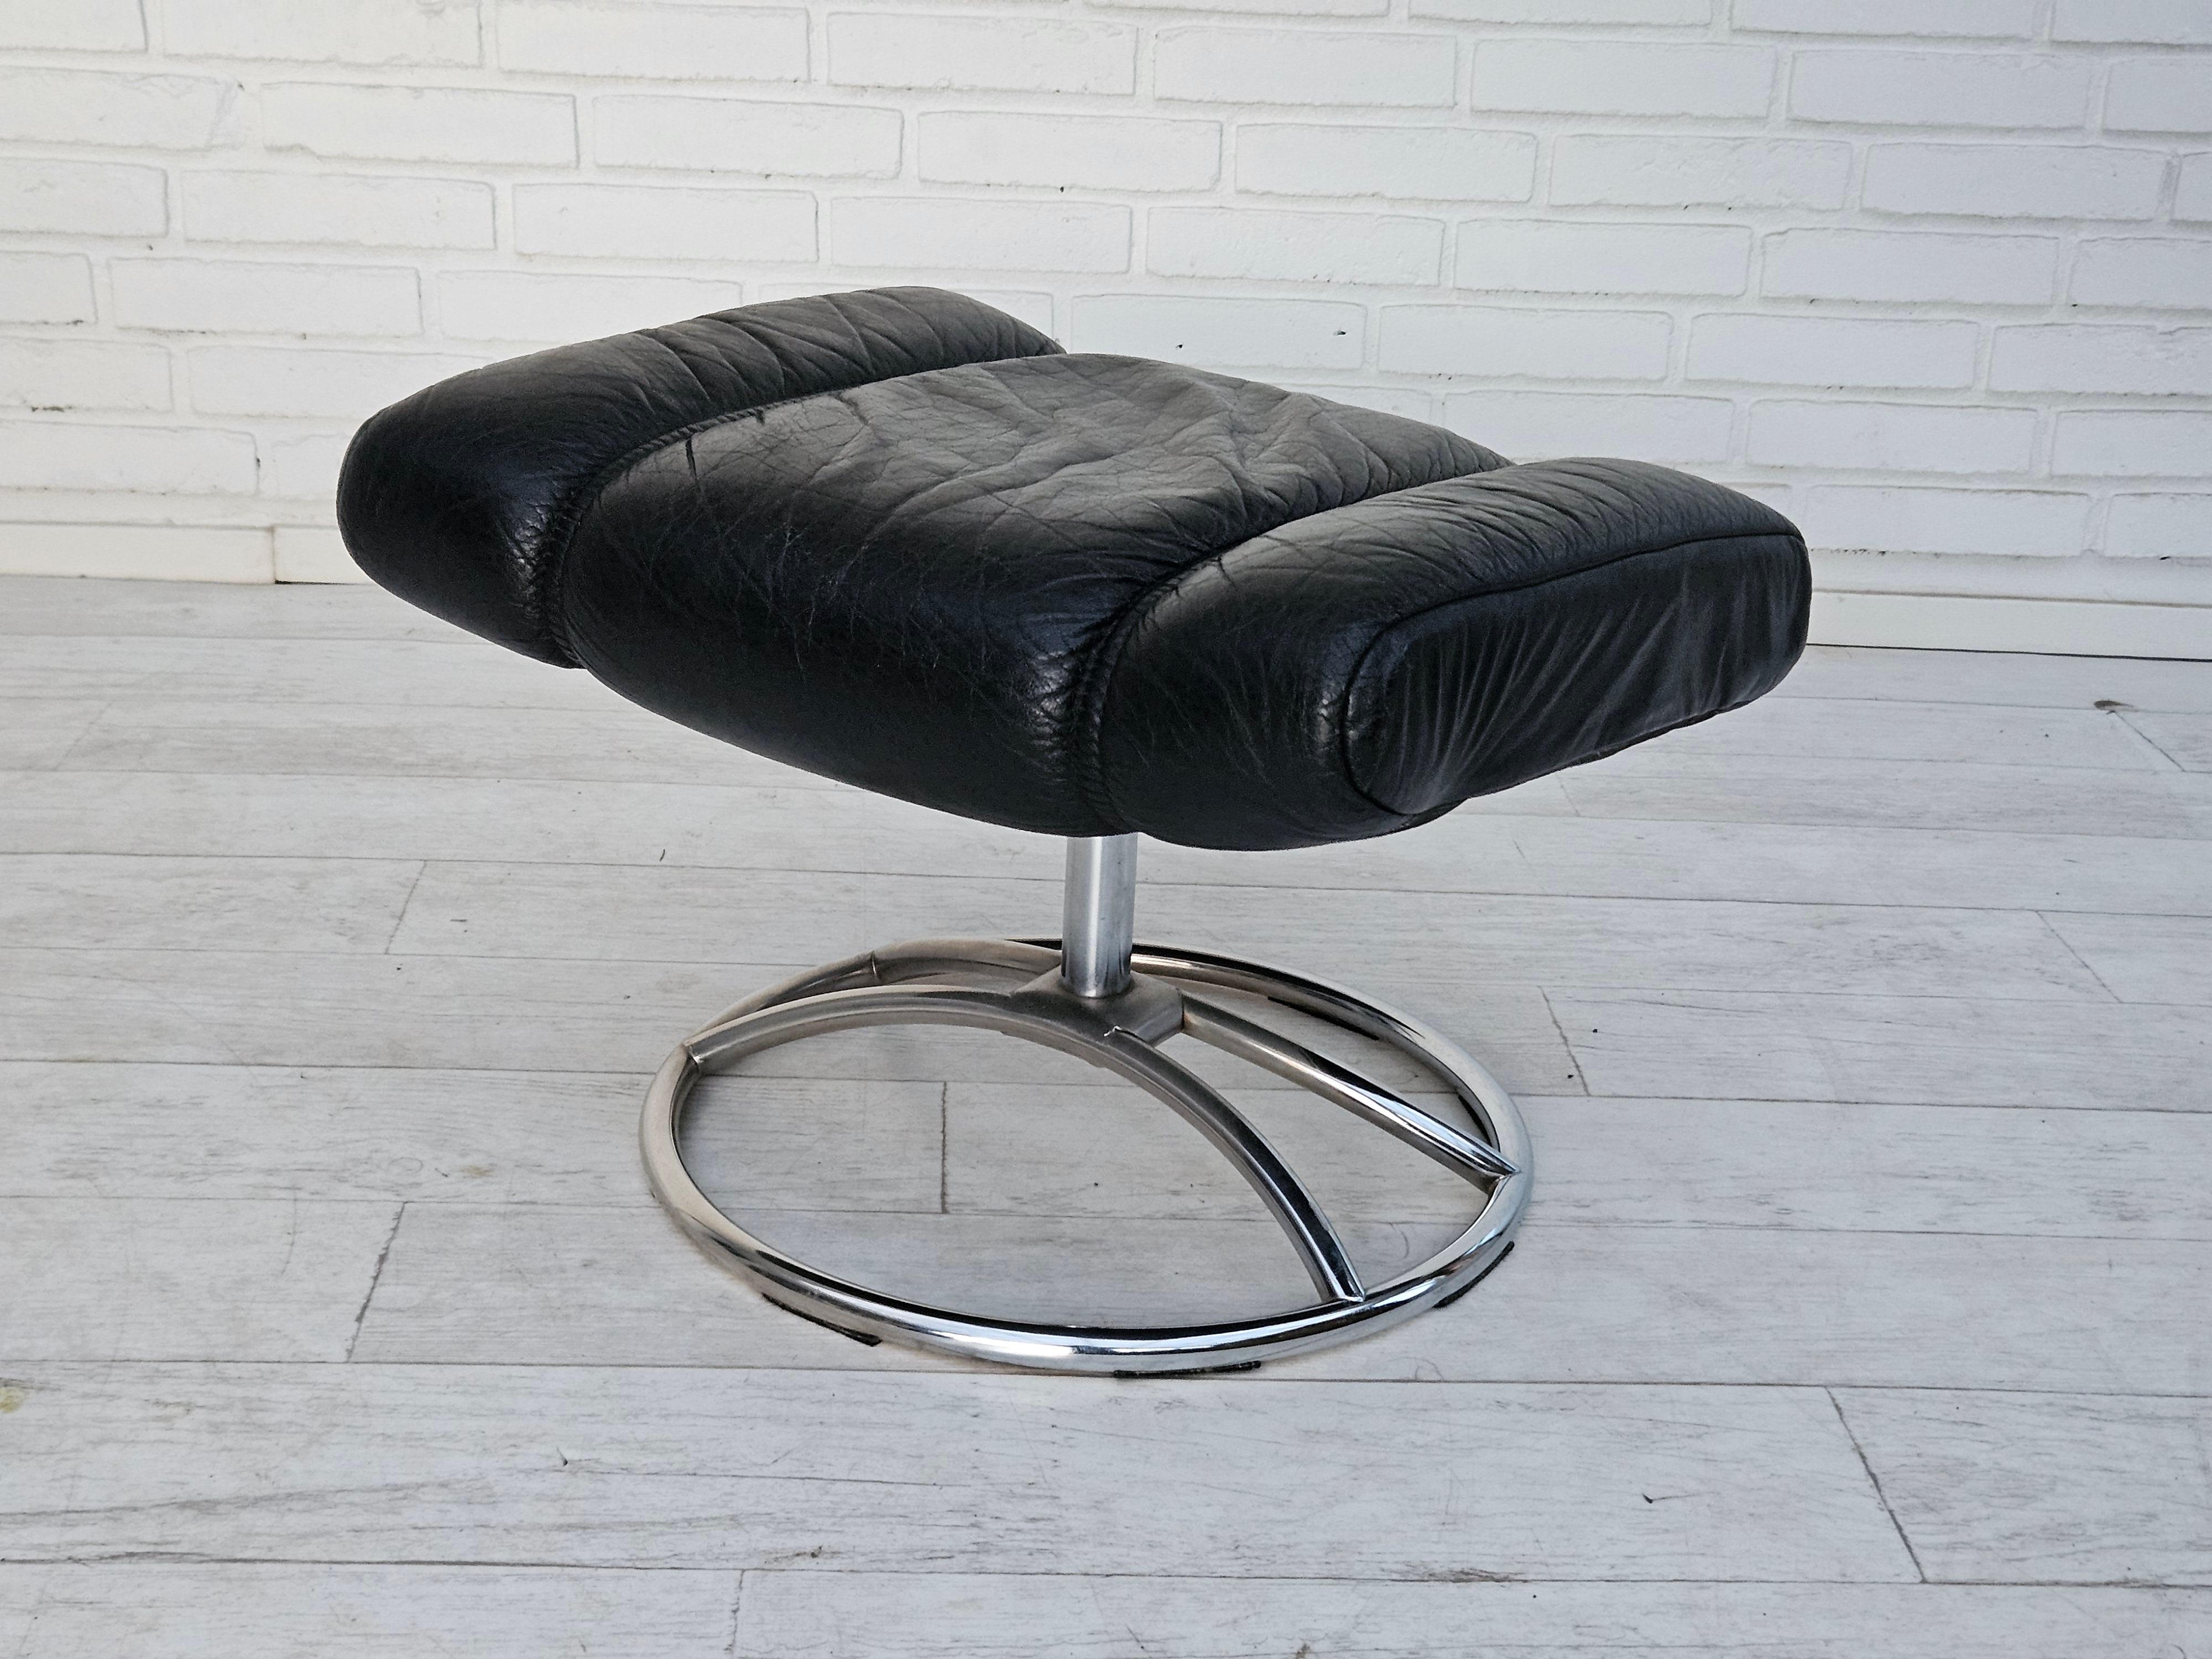 1970s, Norwegian relax swivel chair by Stressless, original very good condition. 11